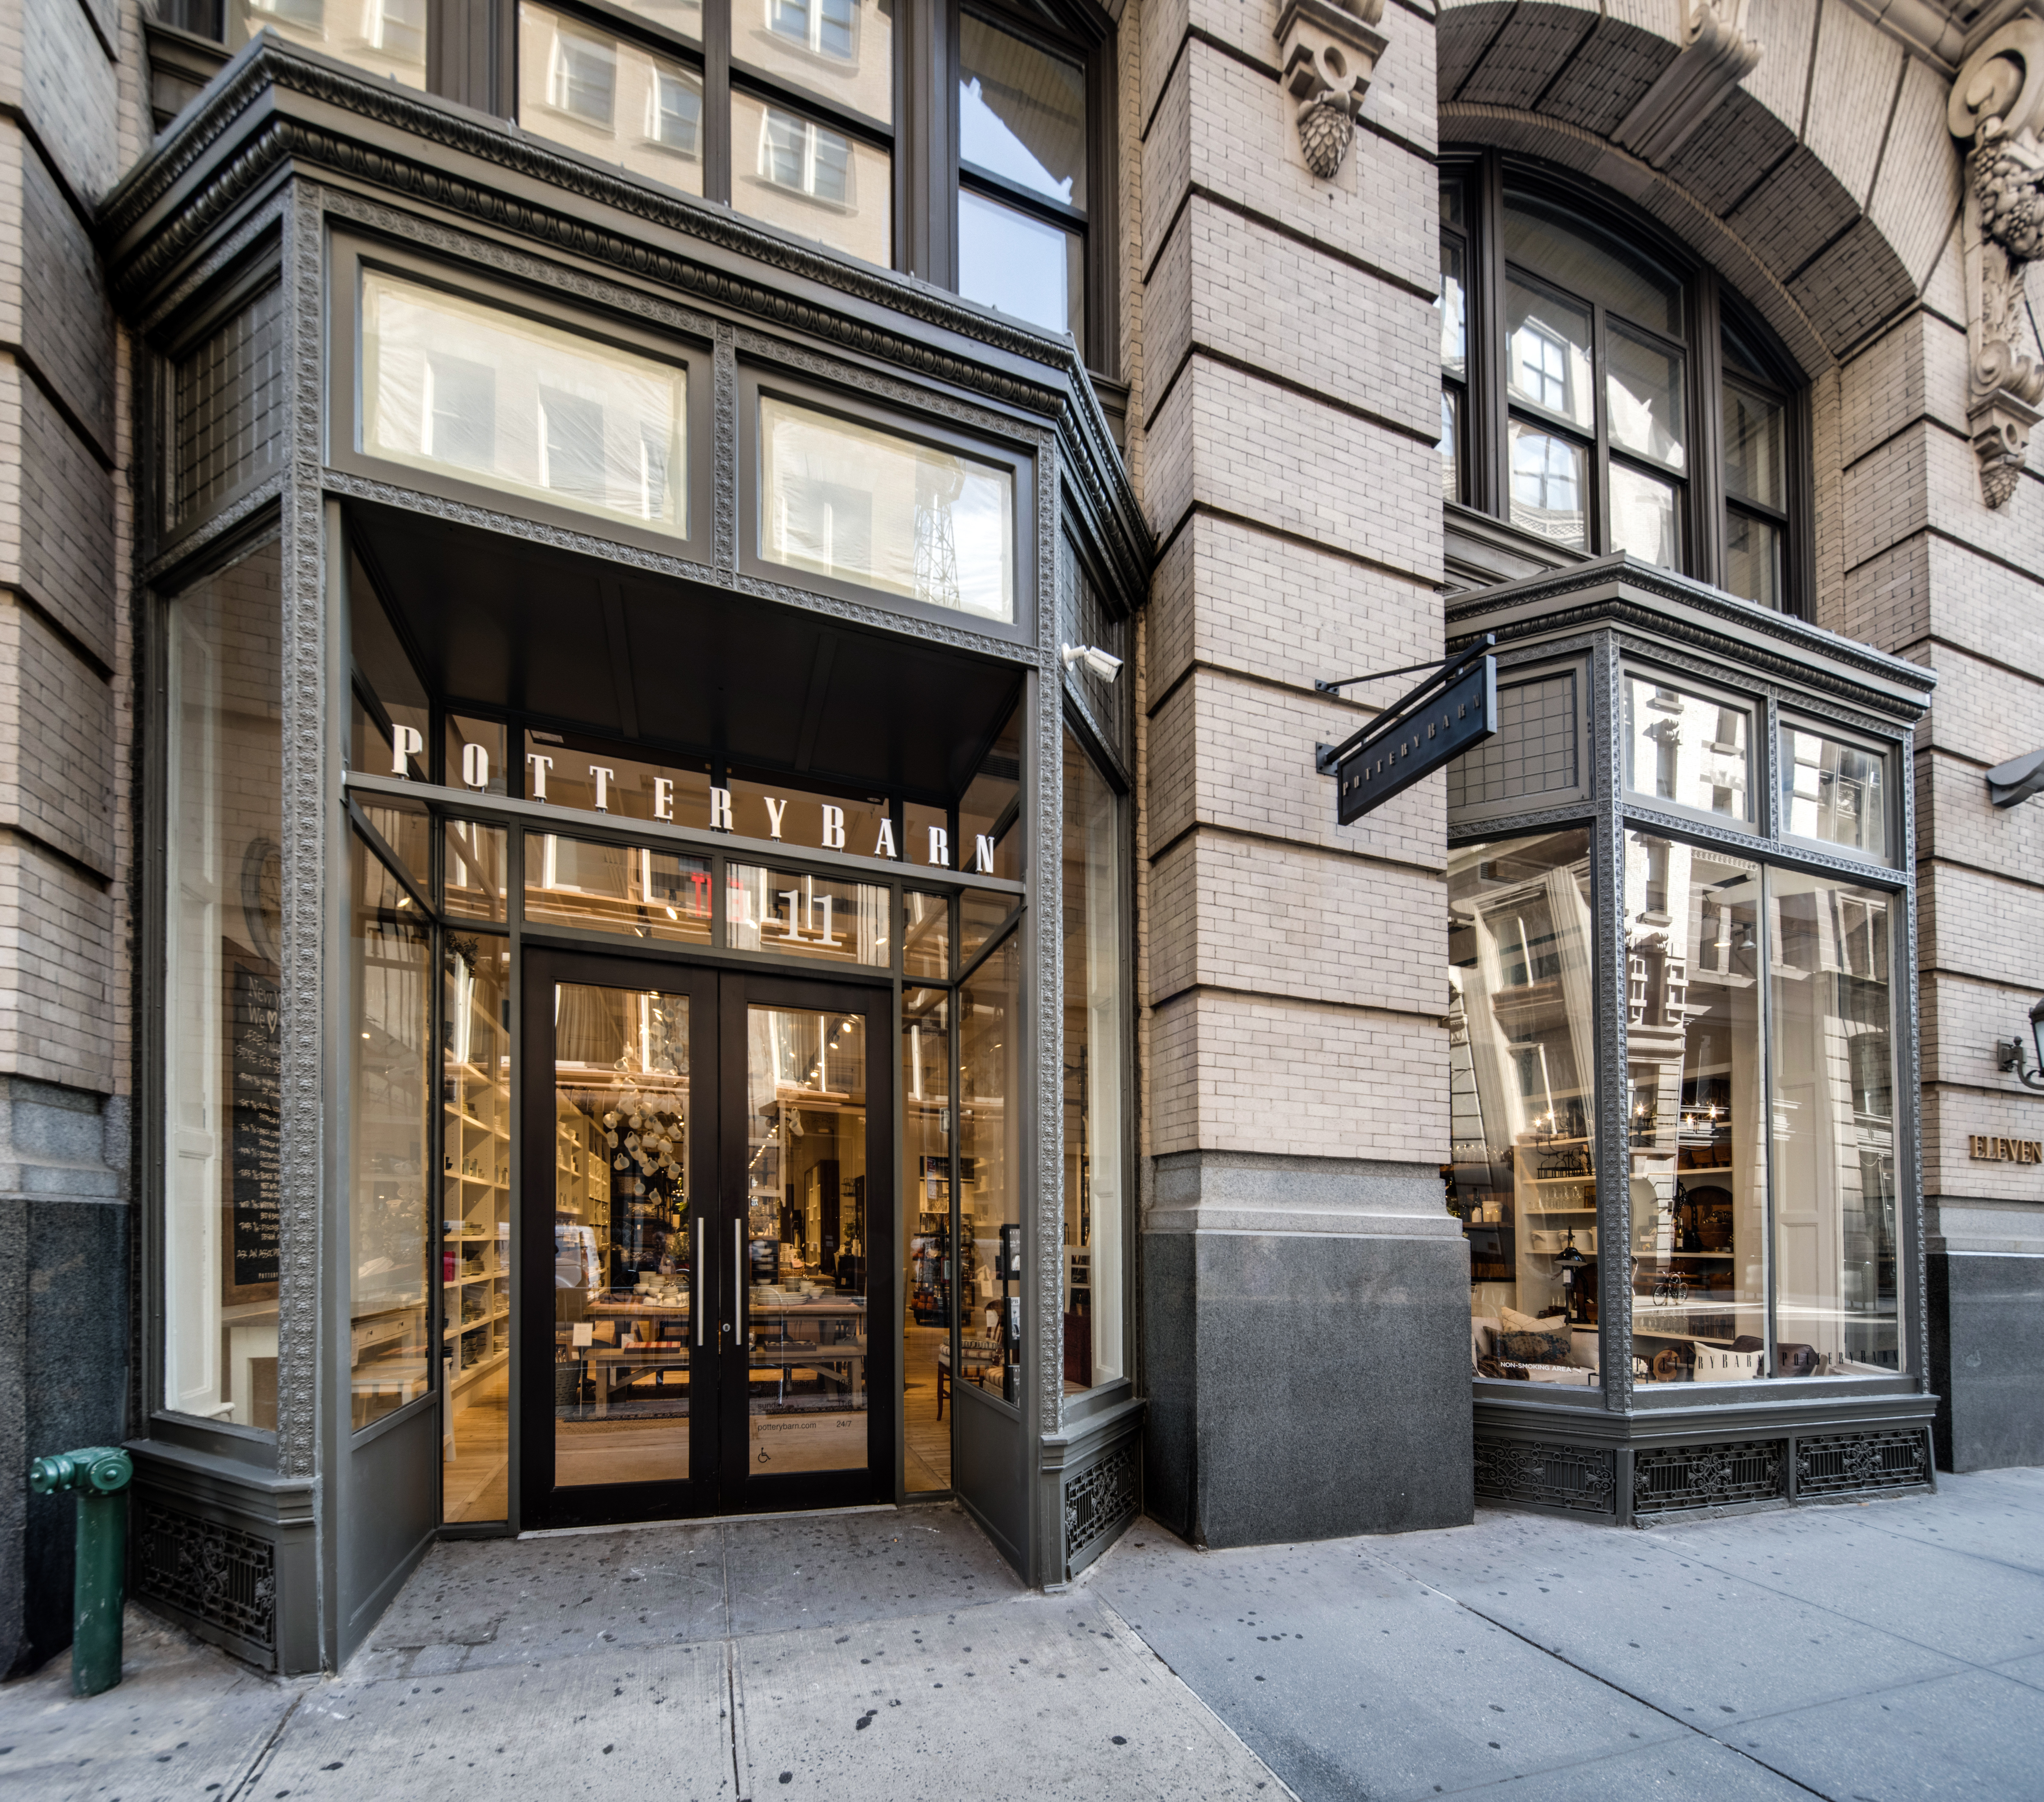 Pottery Barn's New NYC Flagship Focuses on Small Spaces, Easy Decorating